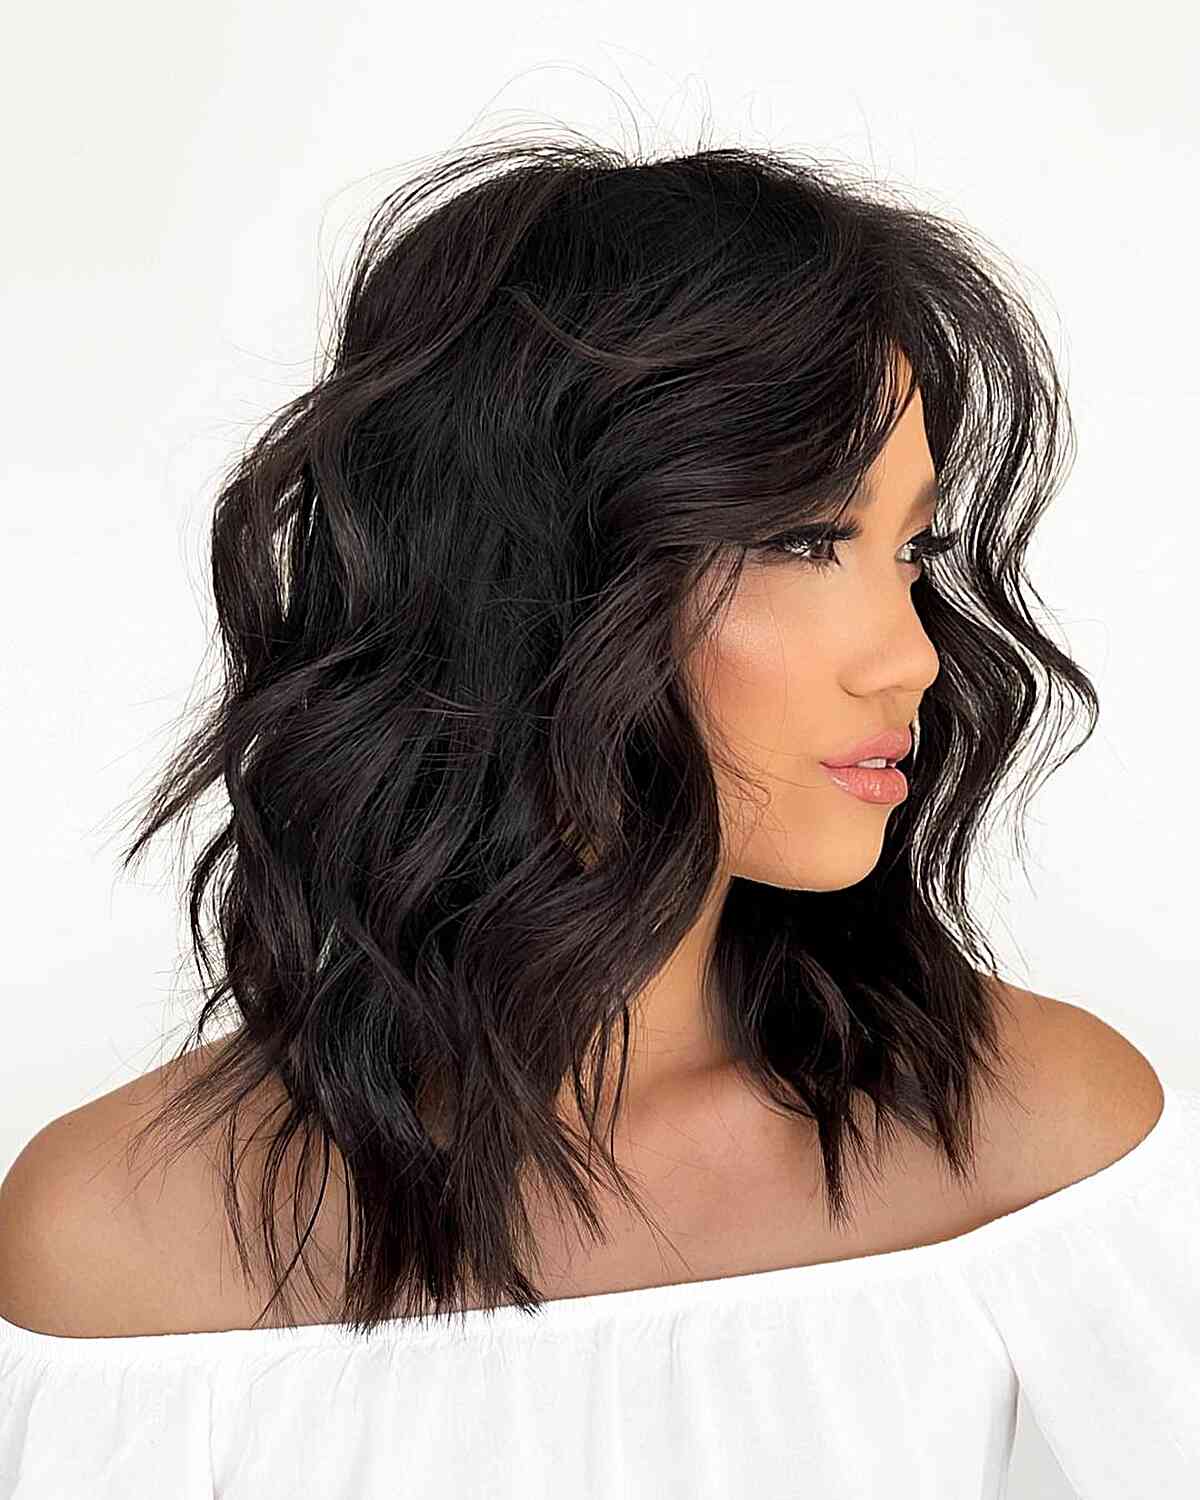 Perfect Shaggy Hair with Waves